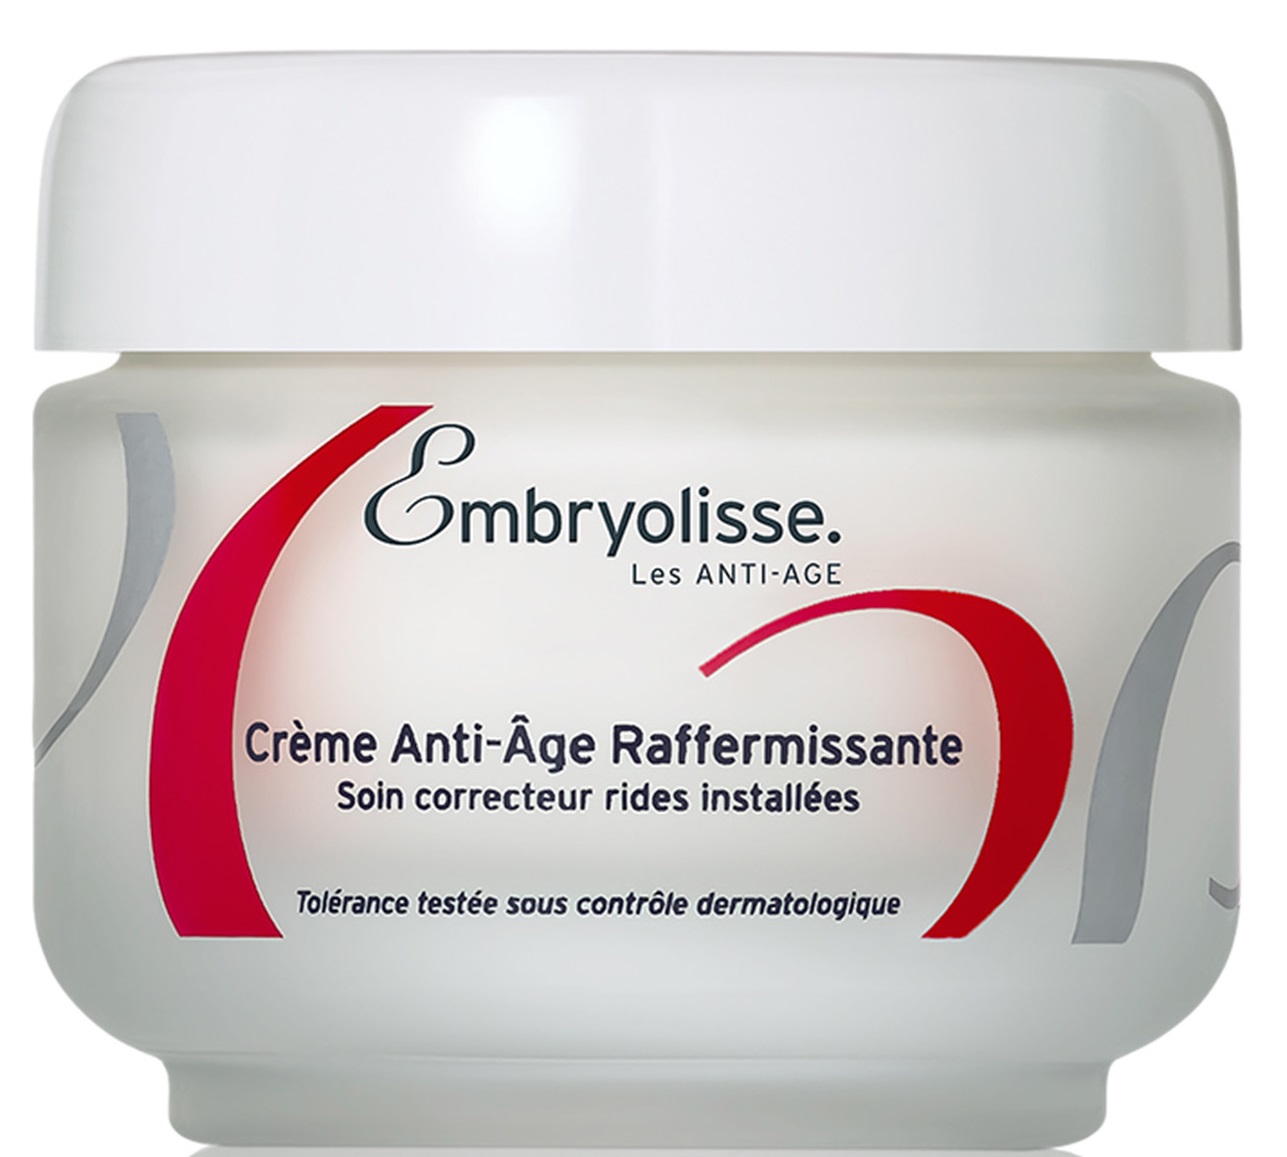 Buy Embryolisse Products Online in Hungary at Best Prices